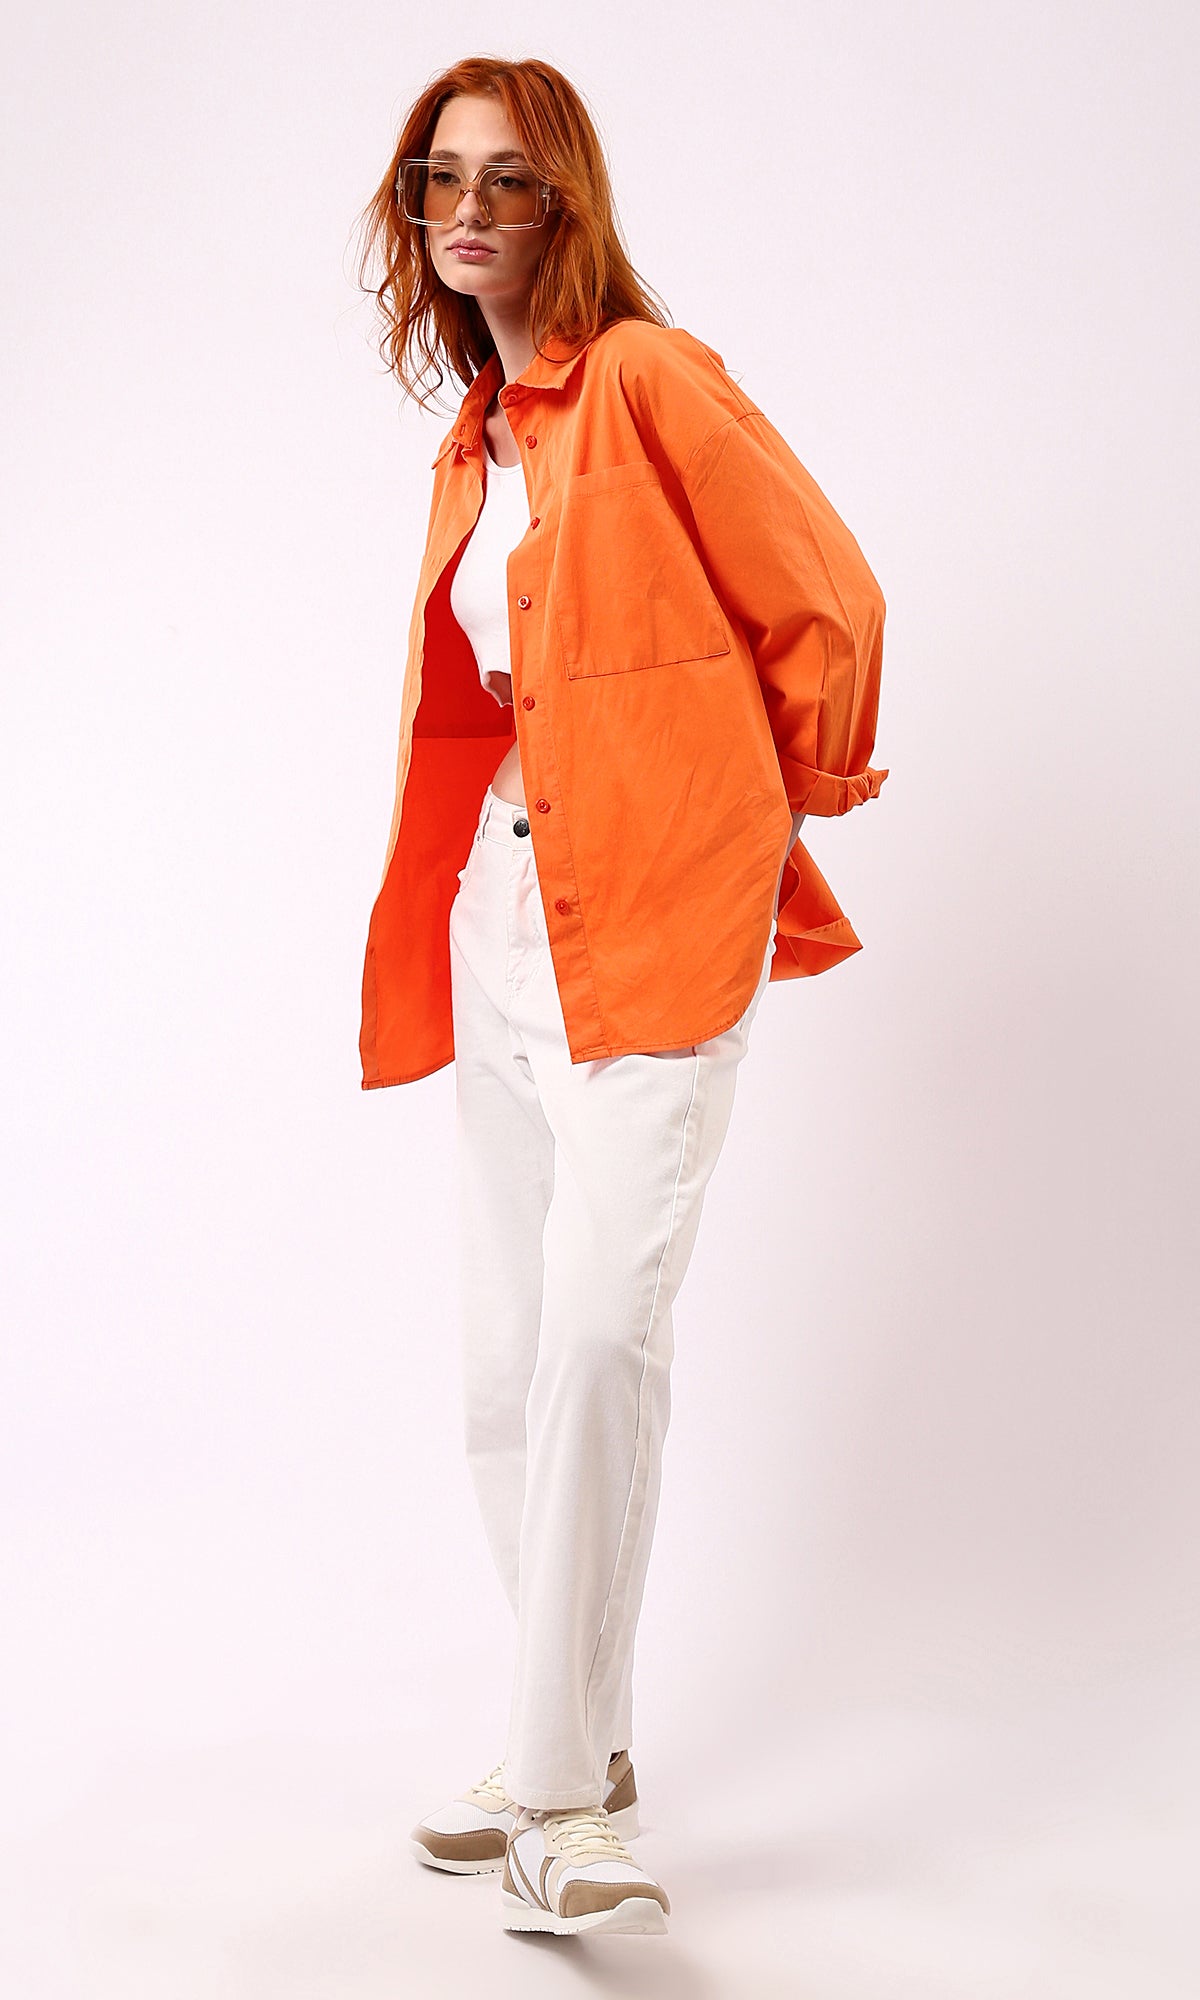 O177909 Solid Orange Casual Shirt With Turn Down Collar